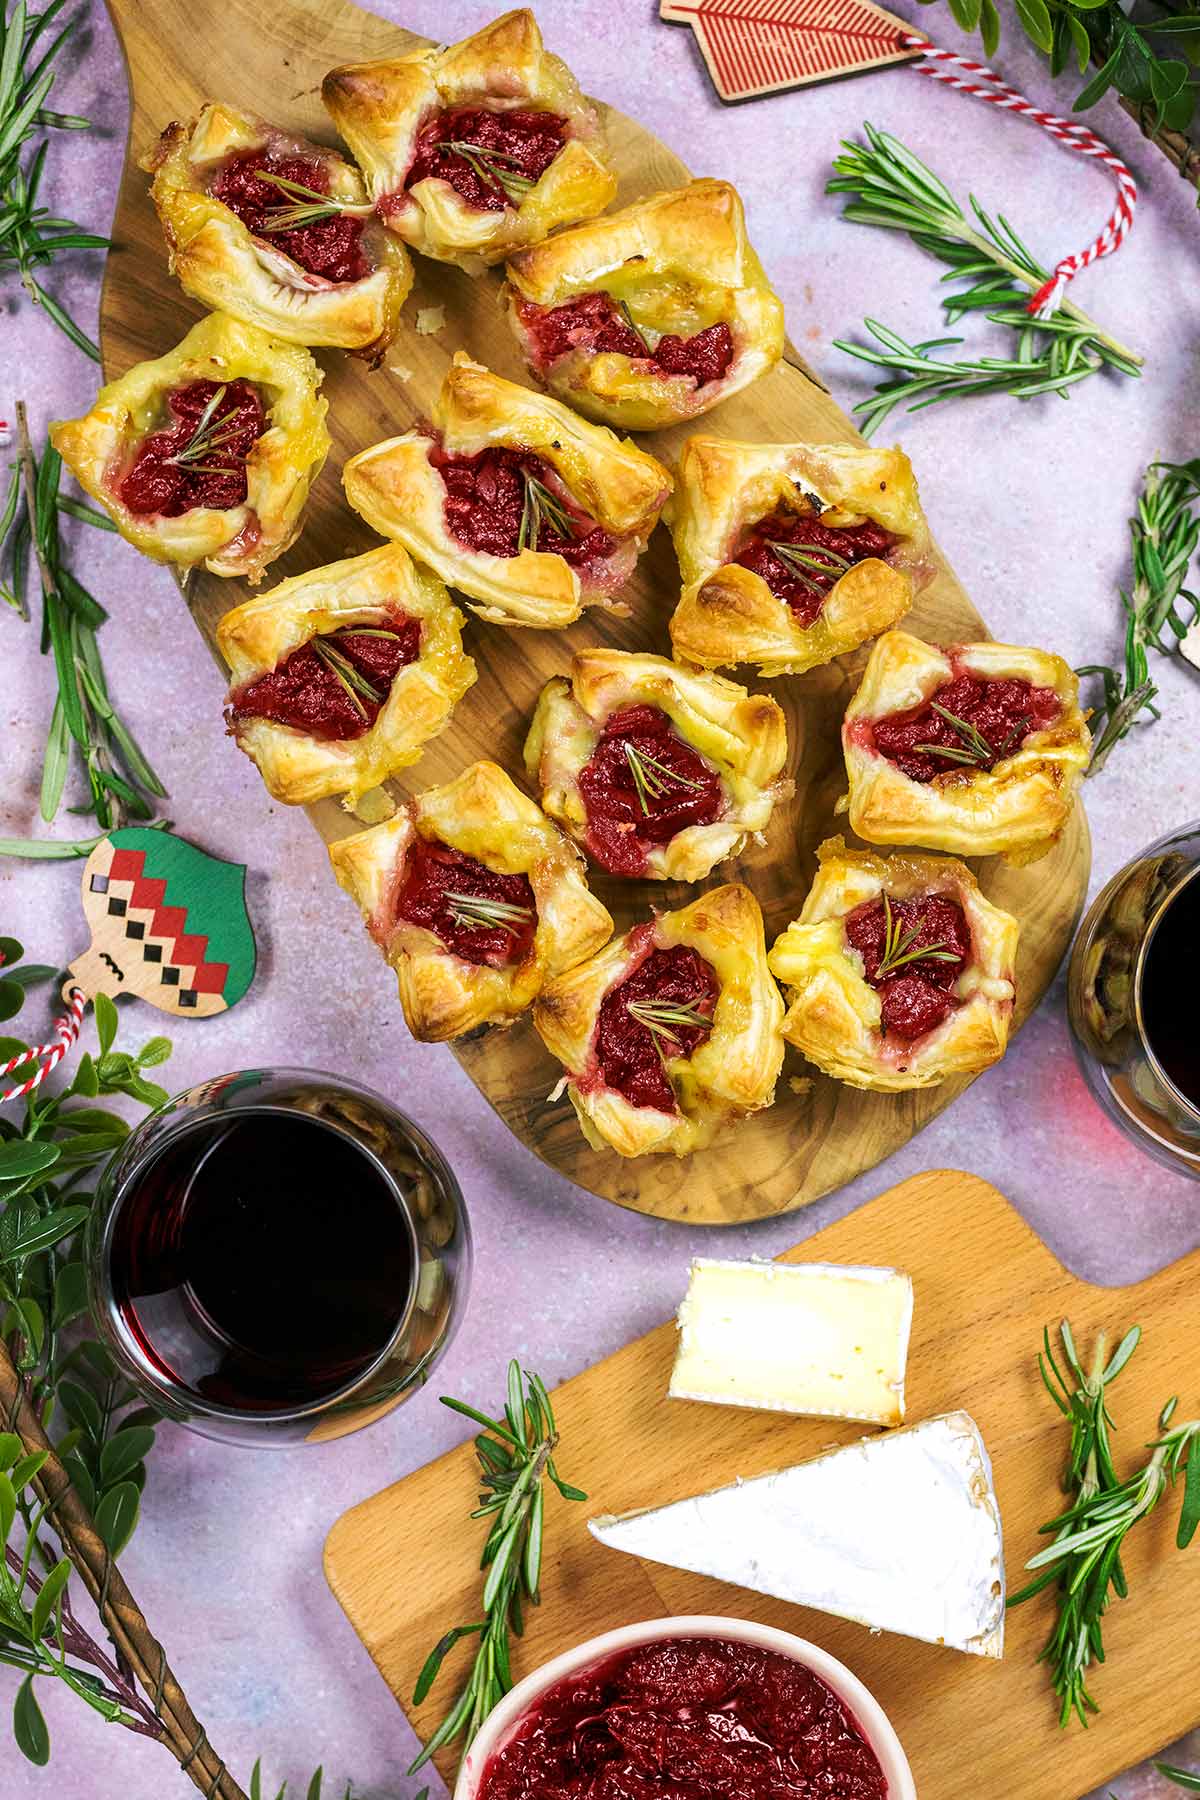 Brie and cranberry bites on a serving board next to some glasses of red wine and a board with cheese on it.